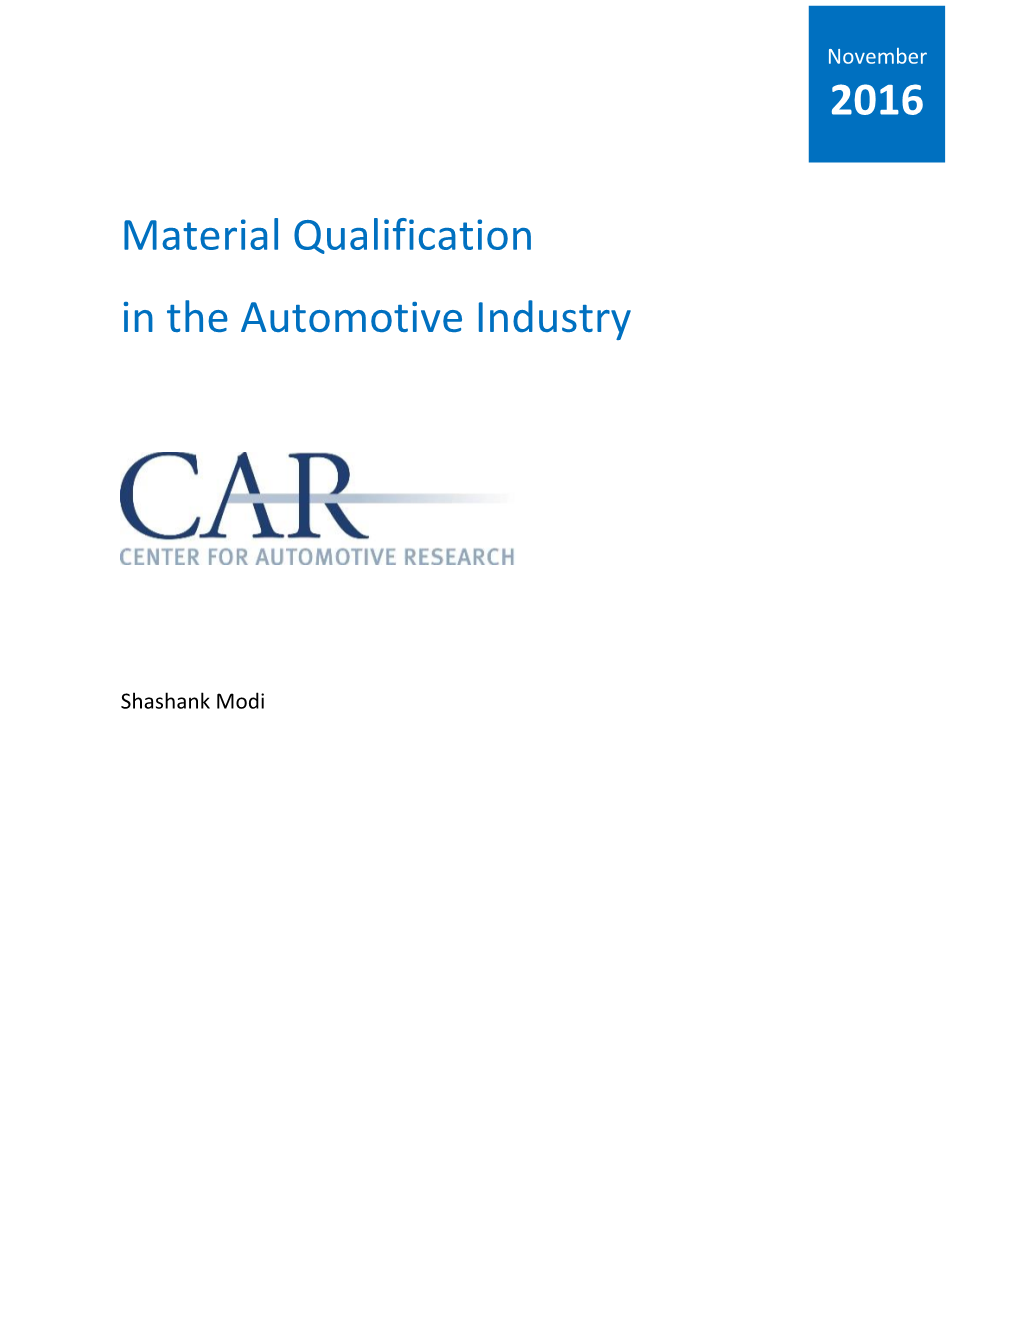 Material Qualification in the Automotive Industry 2016